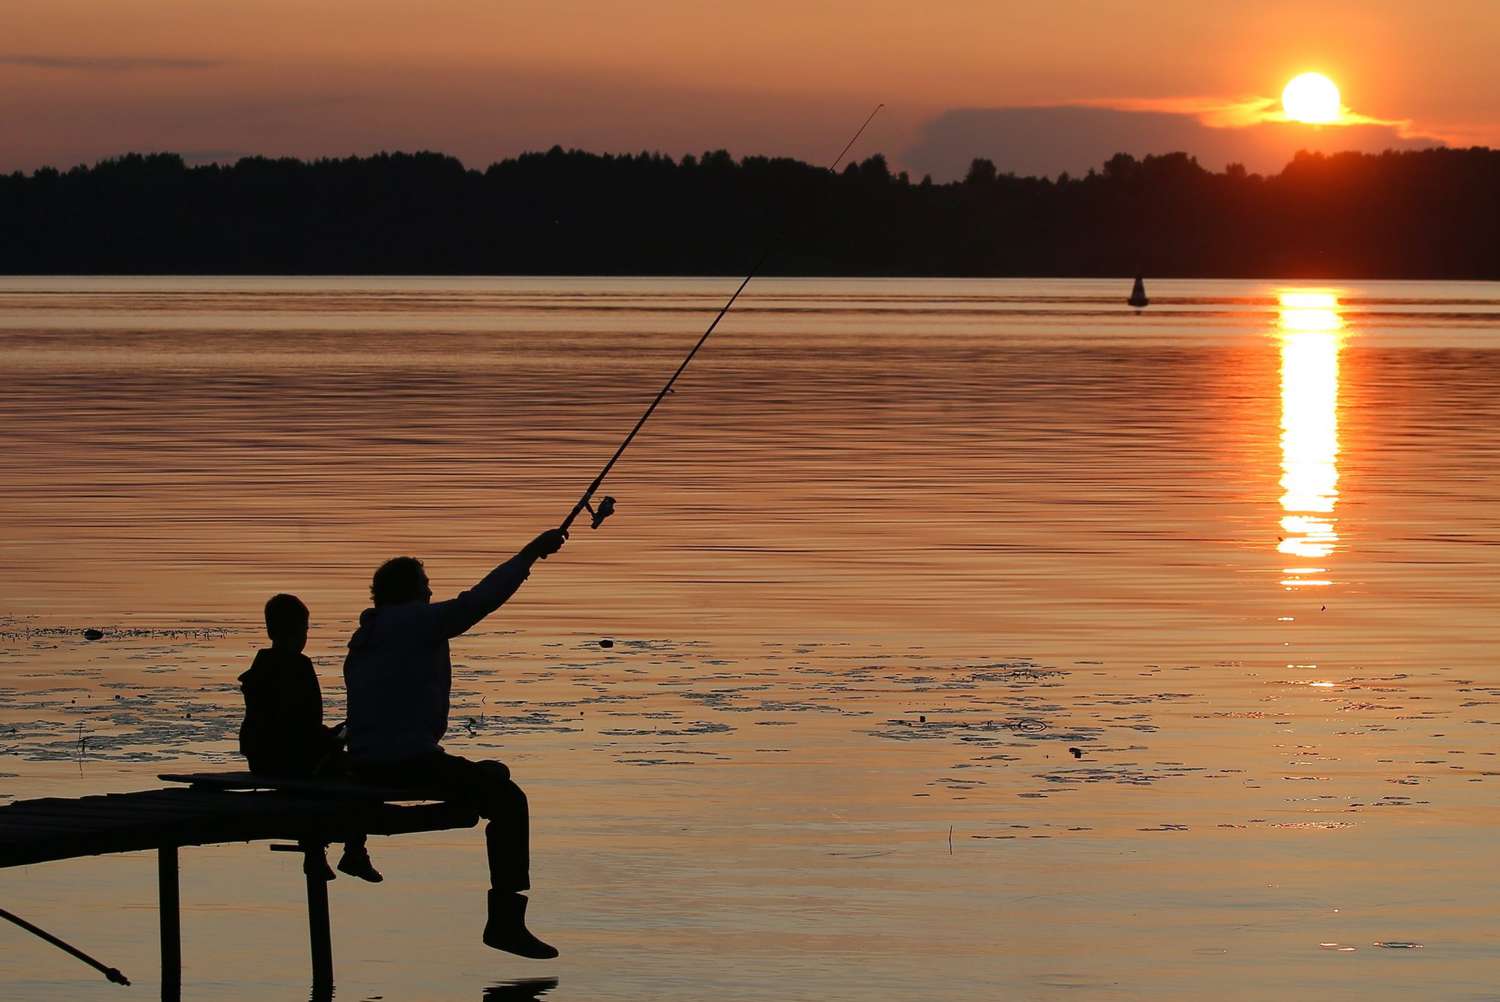 Picutre of Ya man and his son fishing in the sunset